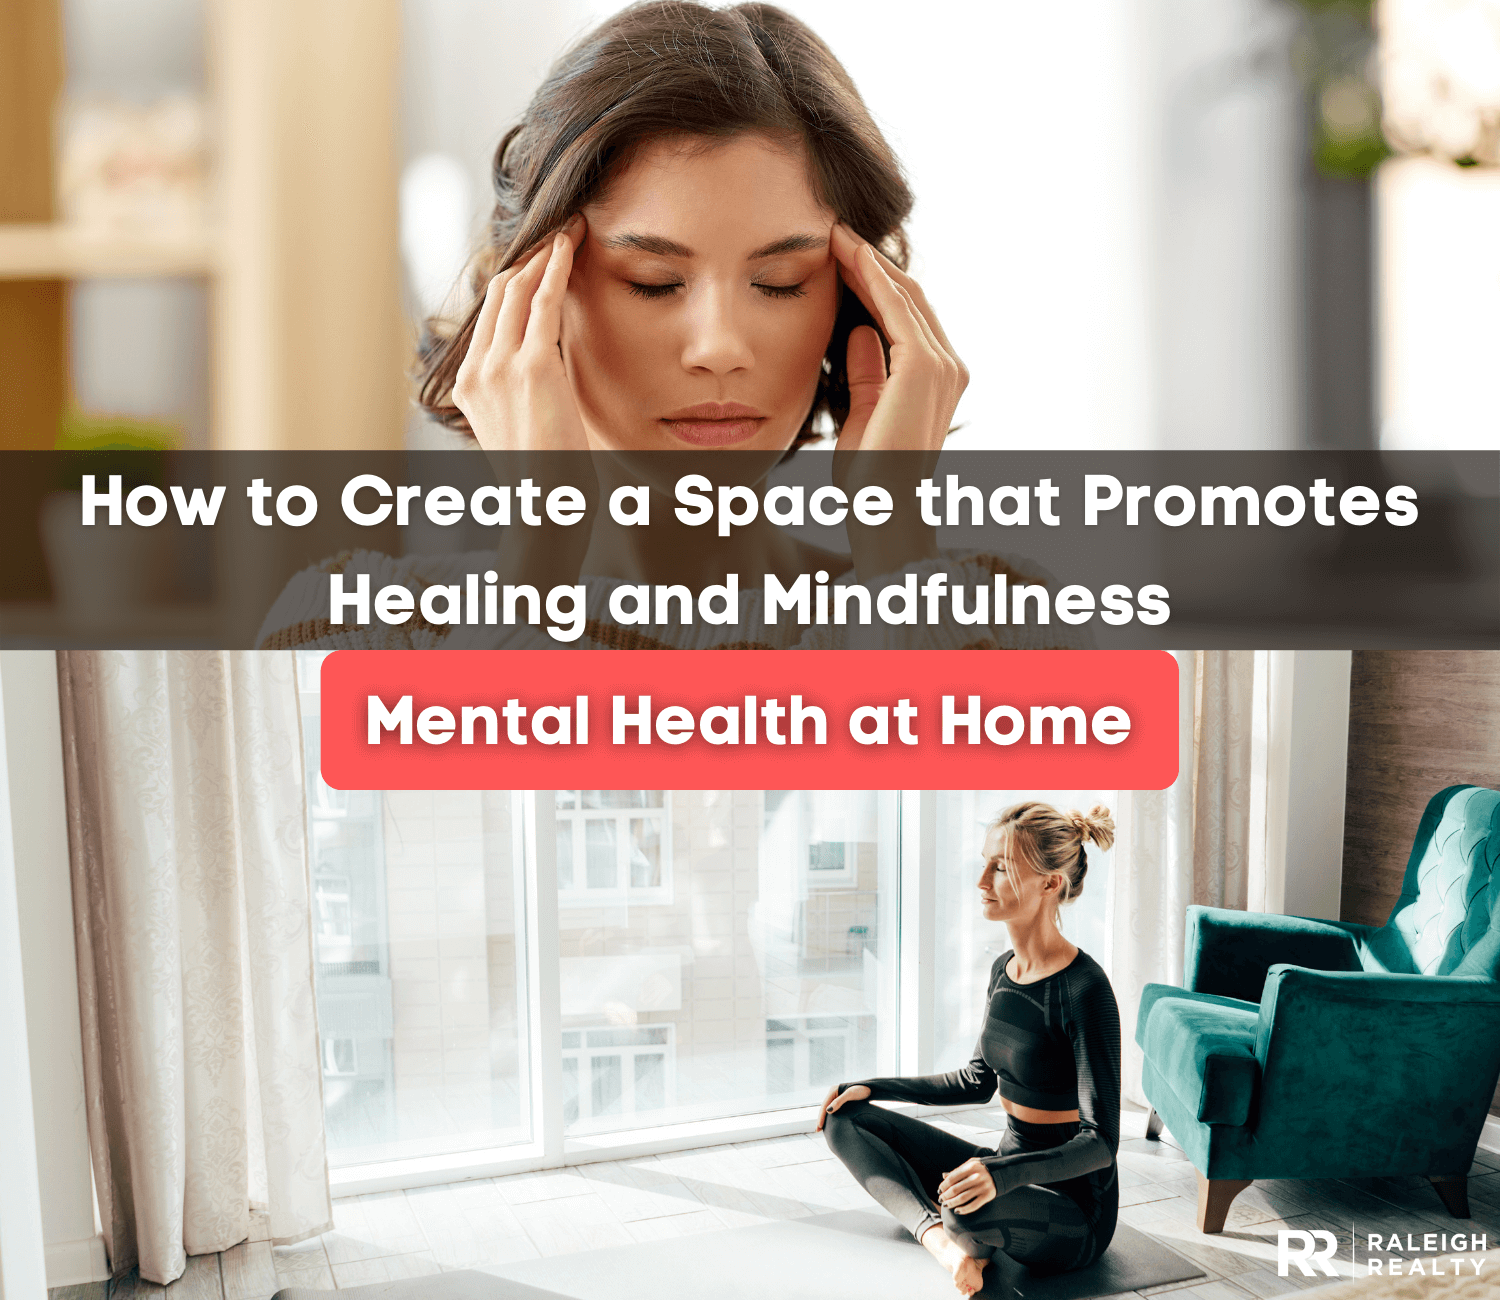 Nurturing Mental Health at Home: How to Create a Space that Promotes Healing and Mindfulness